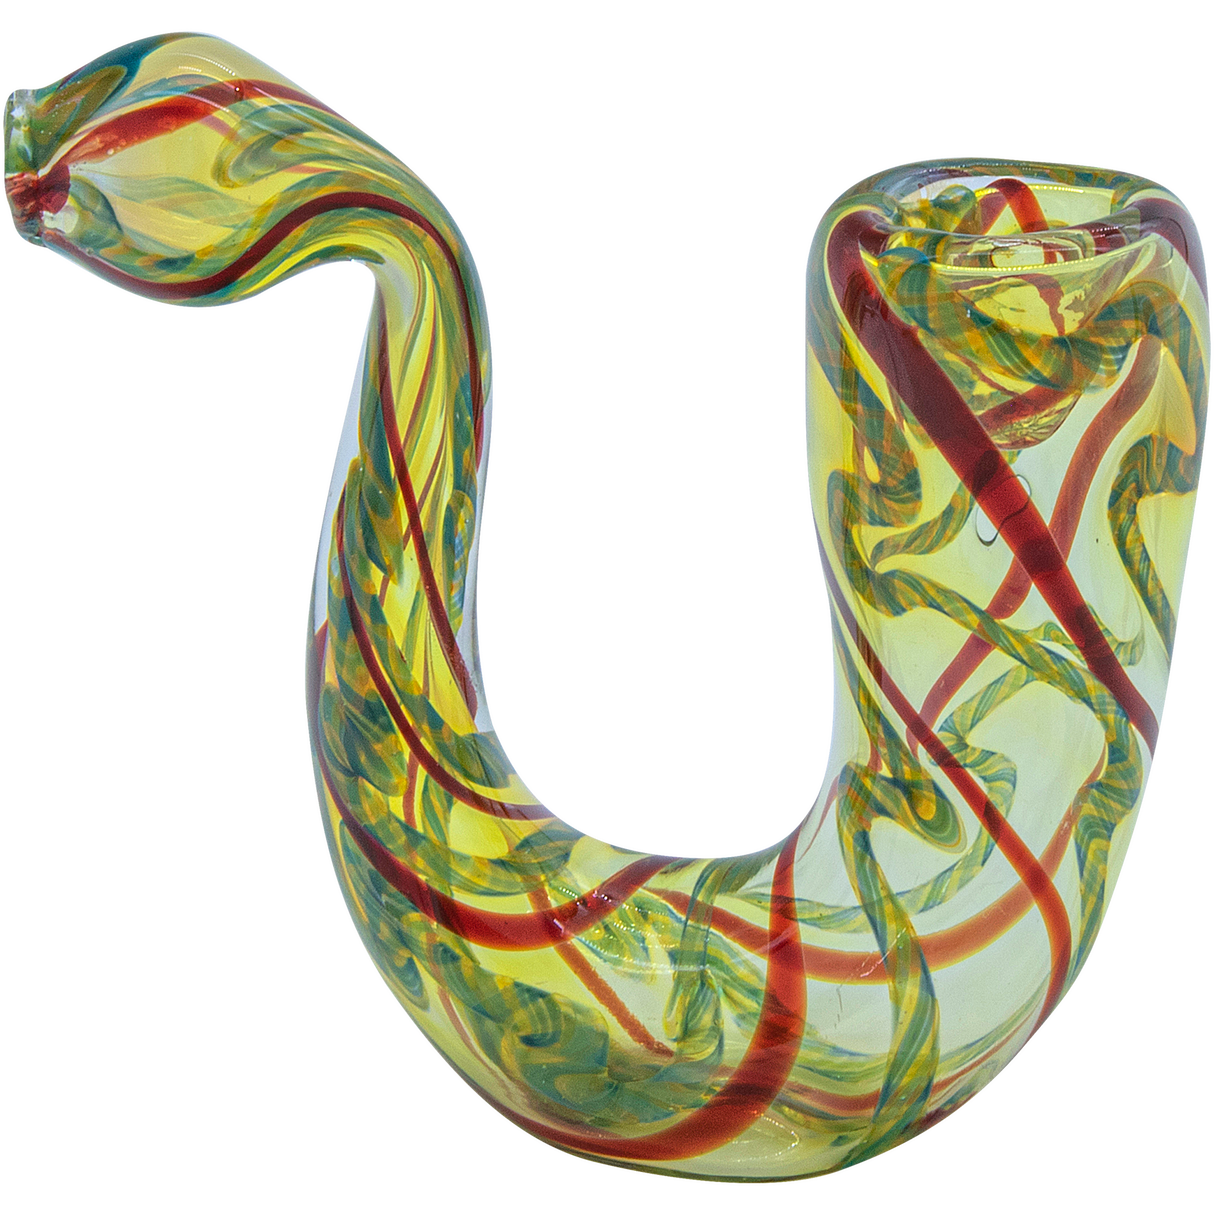 LA Pipes "Gentleman's Sherlock" Pipe in Red Hues, Fumed Color Changing Design, Side View